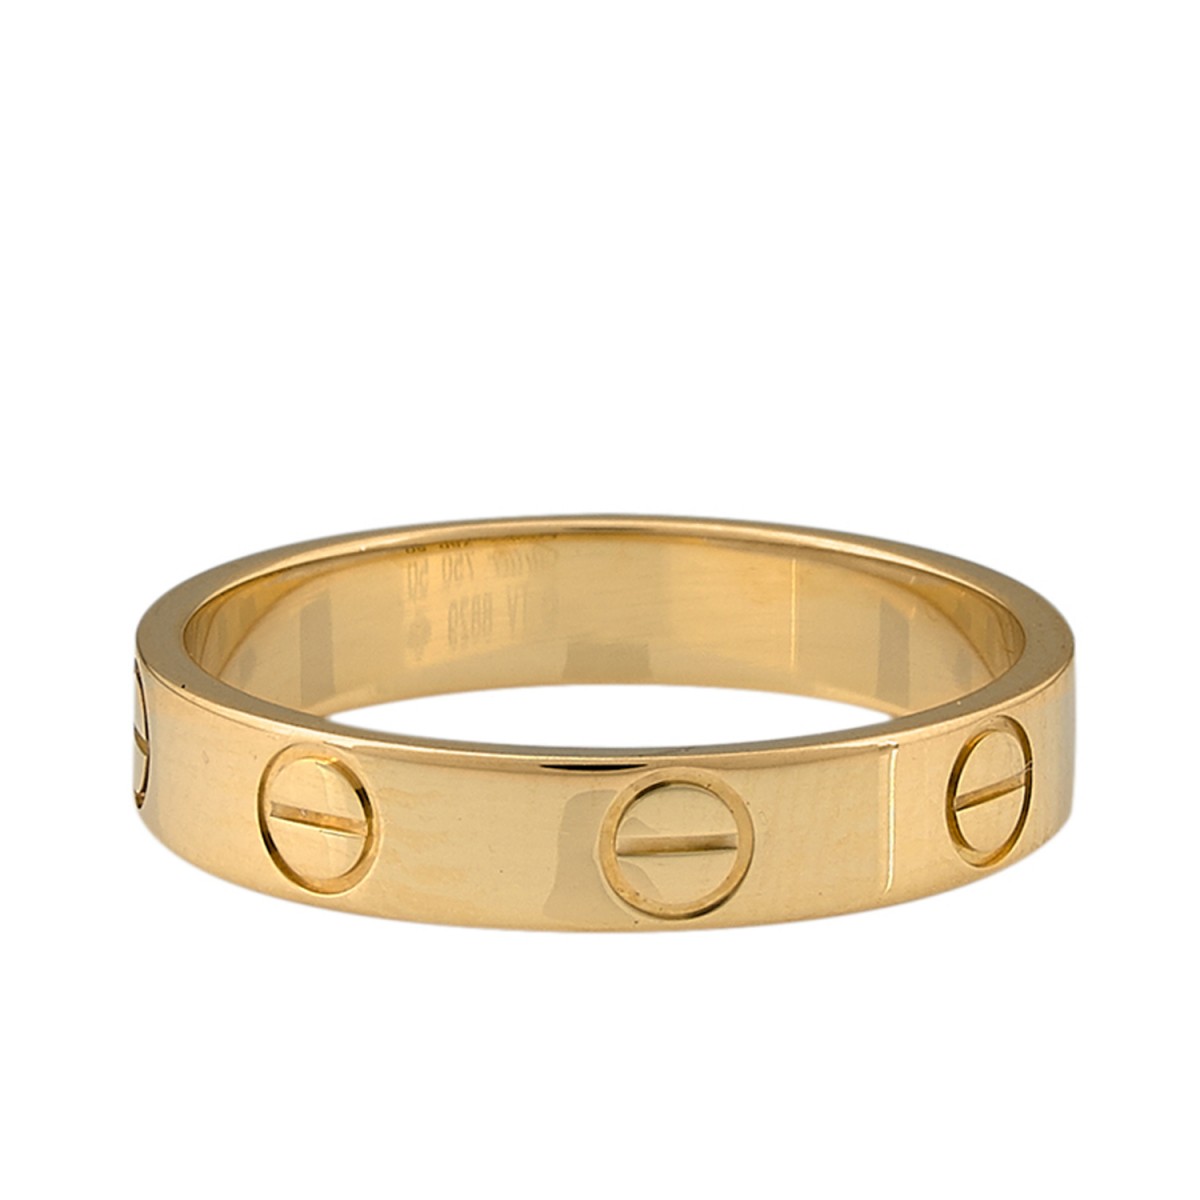 CARTIER Authentic Cartier Ring ring 18KYG (750) Yellow Gold Used JP size 22  #63 ｜Product Code：2101215905697｜BRAND OFF Online Store